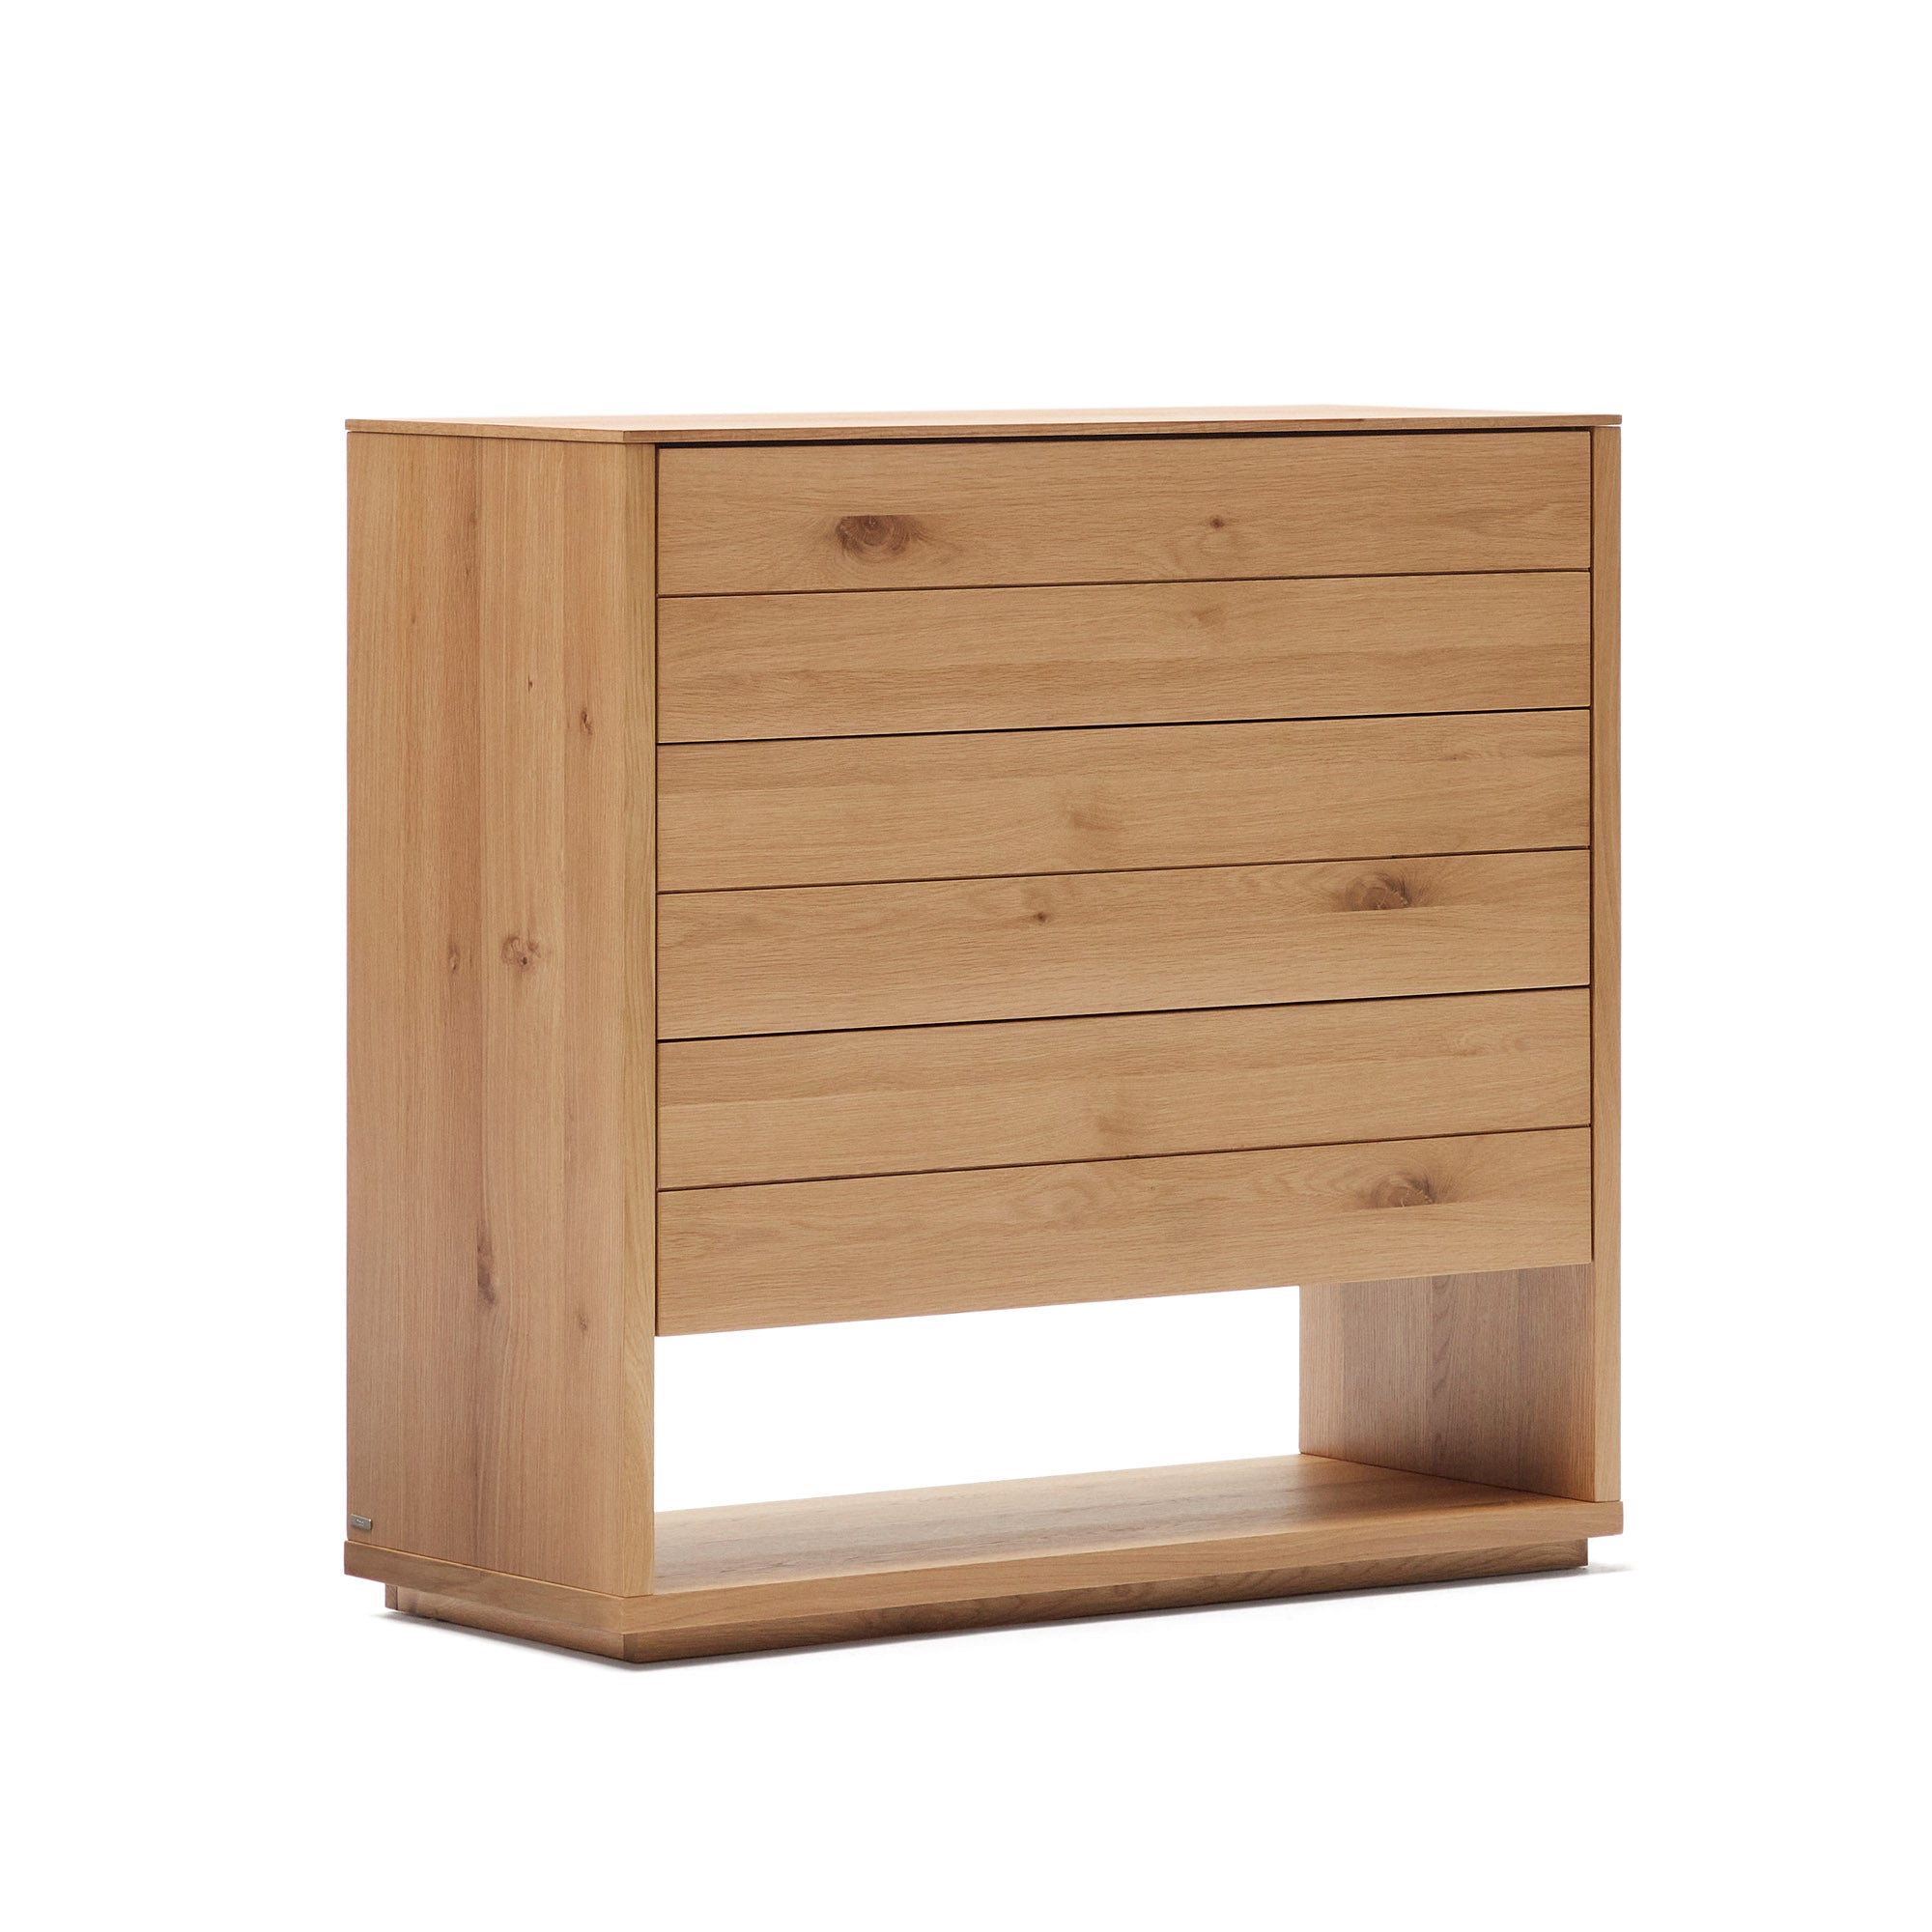 Alguema chest of drawers with 3 drawers in oak wood veneer with natural finish, 100 x 97 cm